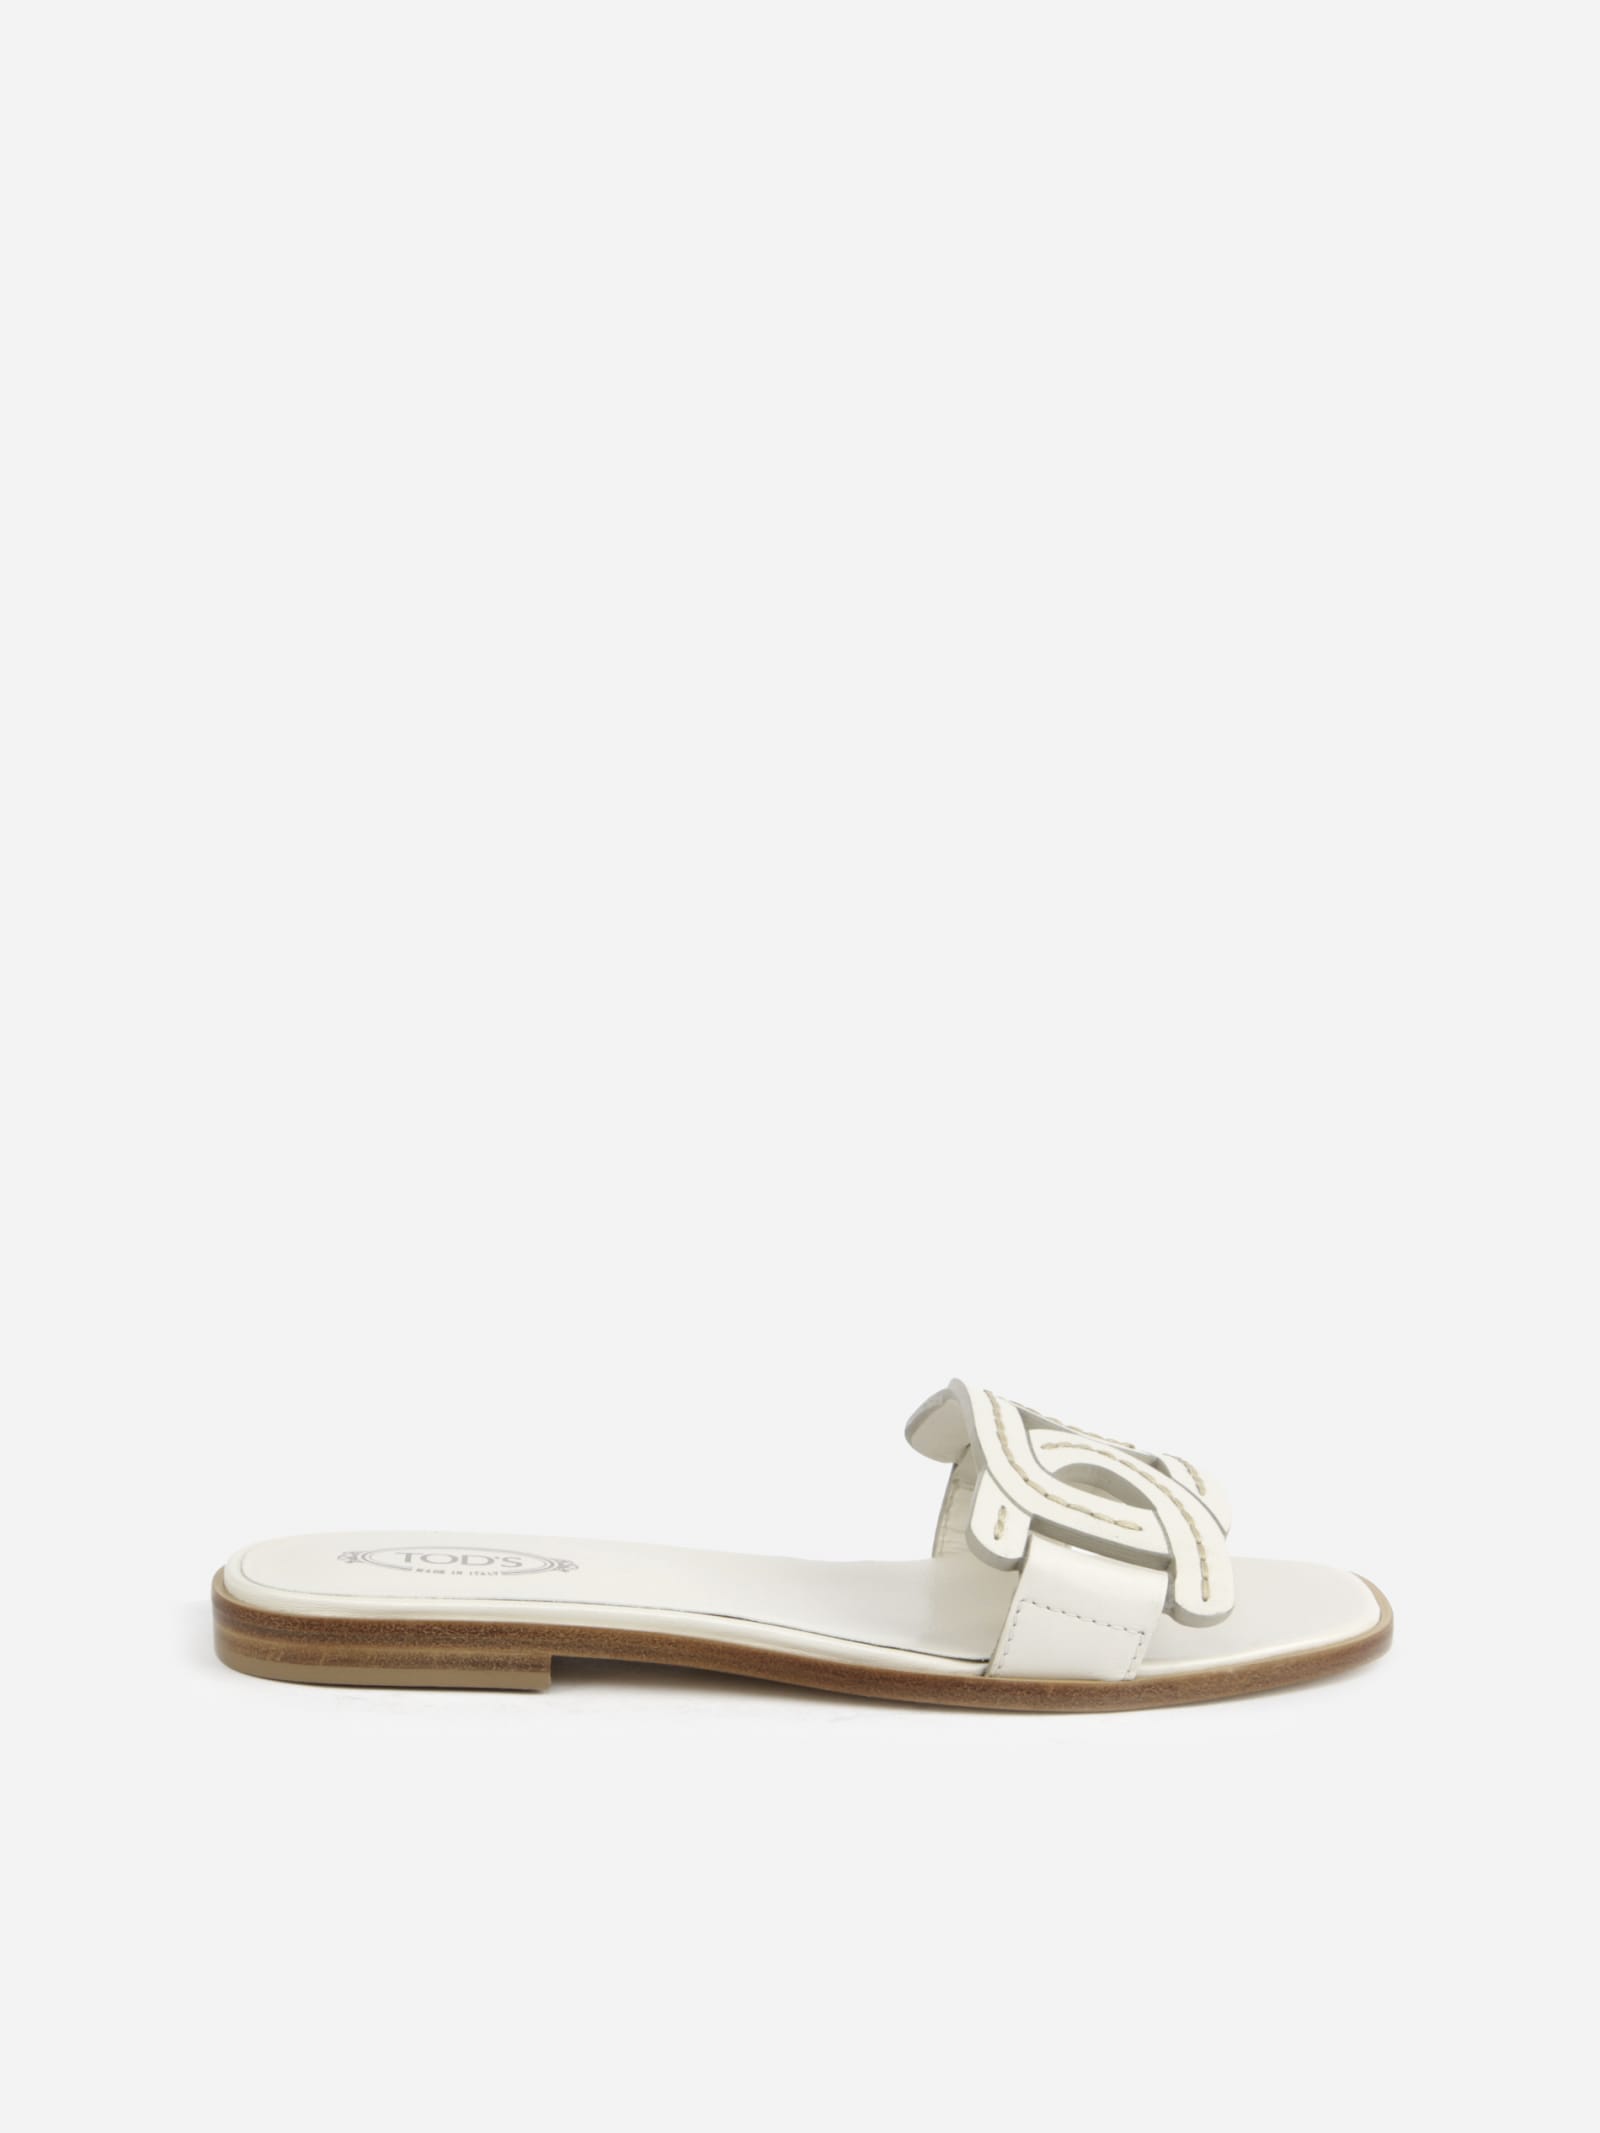 Tods Braided Leather Sandals